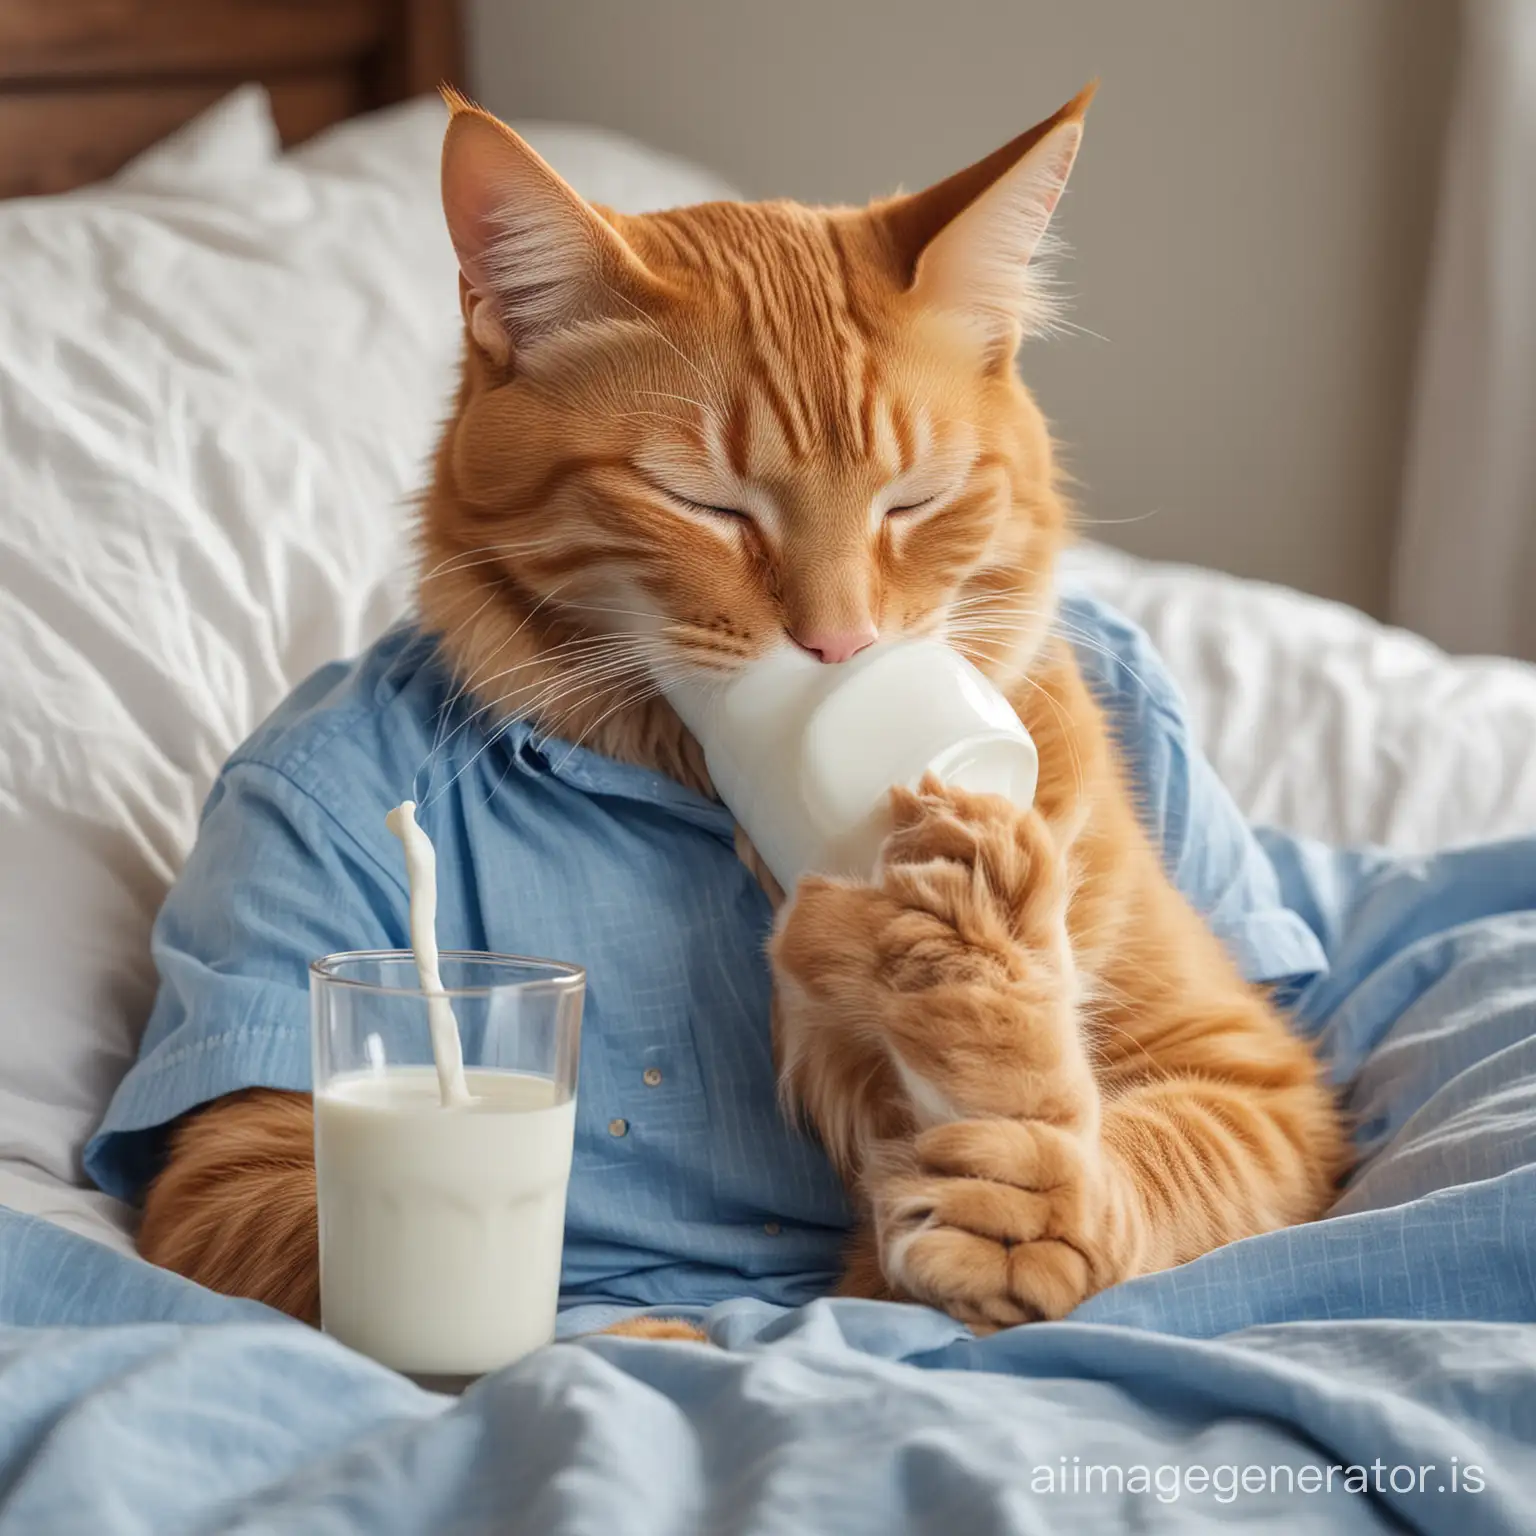 Draw a picture of an orange cat wearing a blue shirt drinking milk while sleeping on the bed